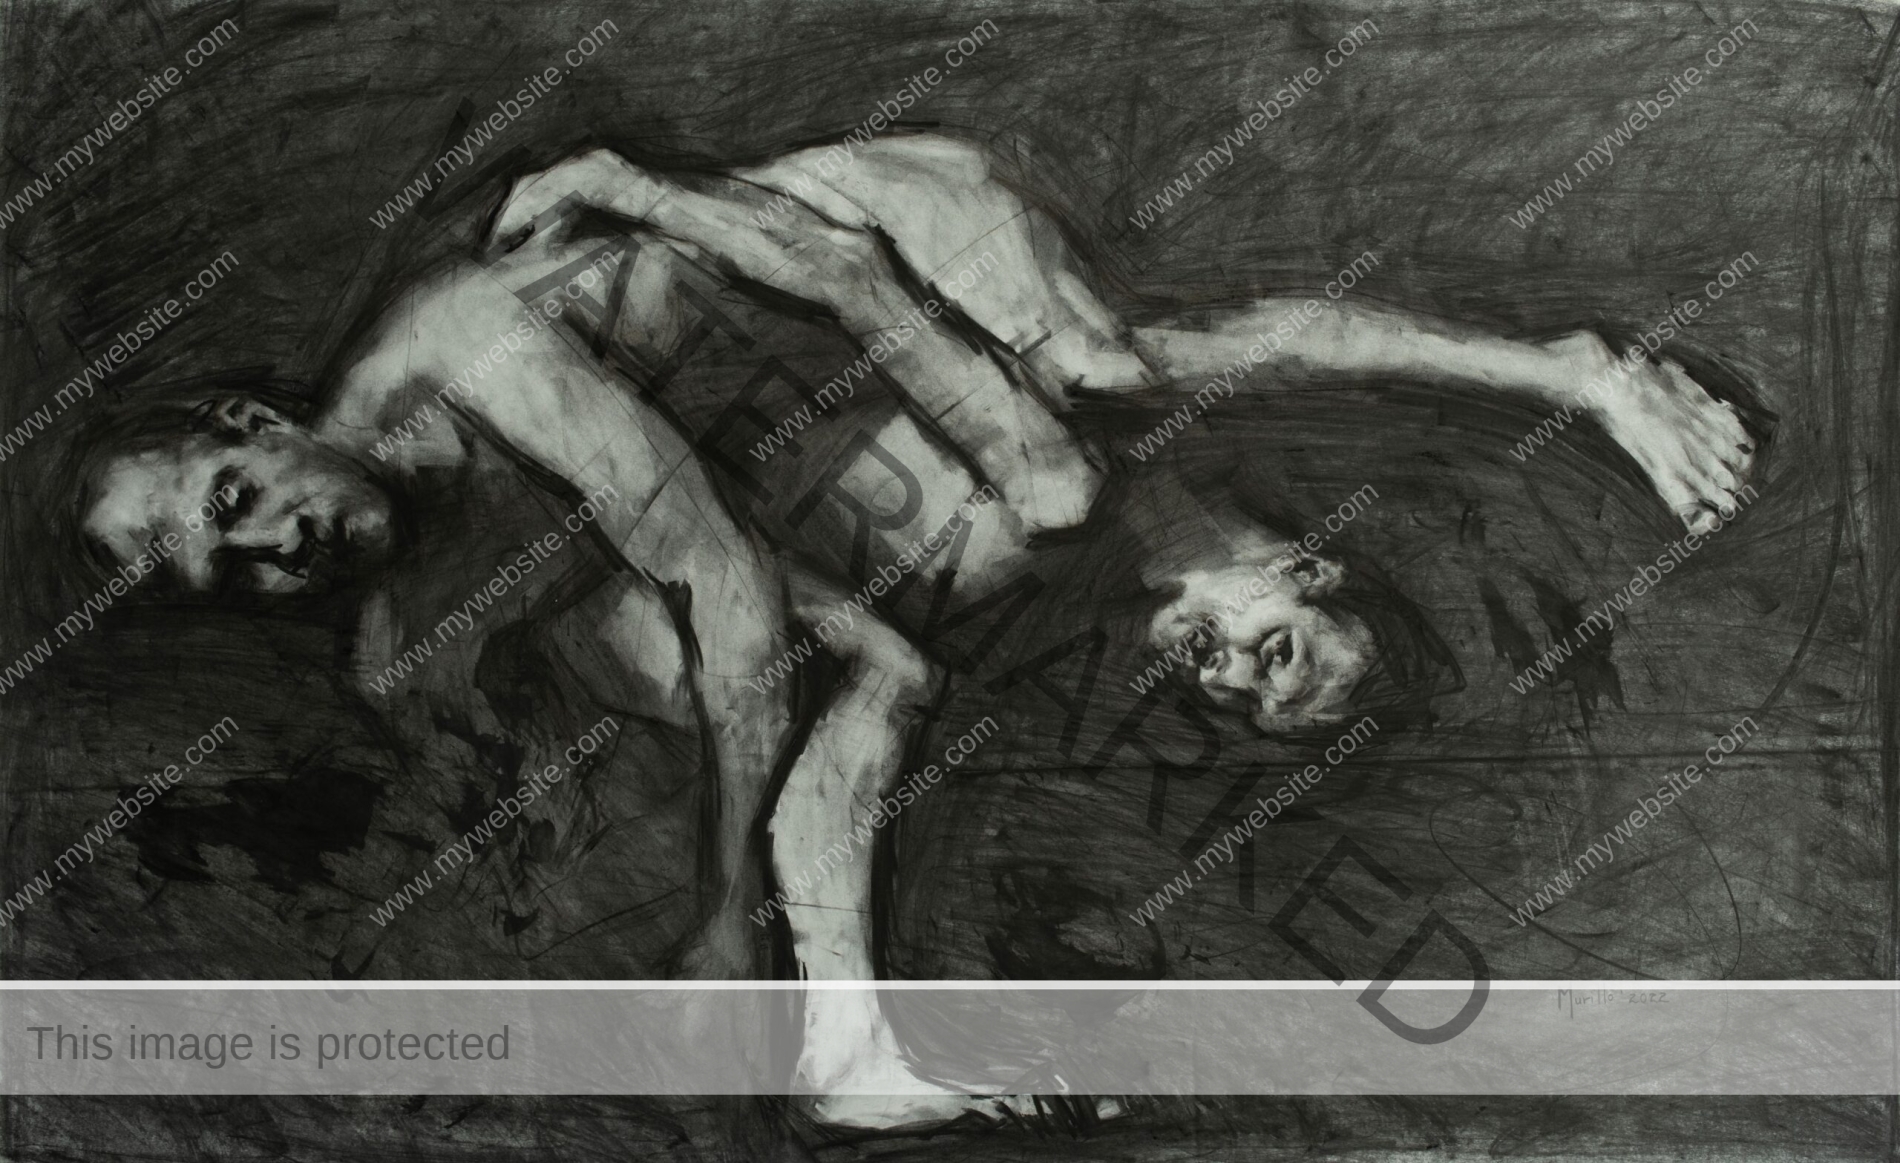 Charcoal drawing from Roberto Murillo's figurative Couplings series, featuring a nude couple. One carrying the other on his back. Couplings X artwork.